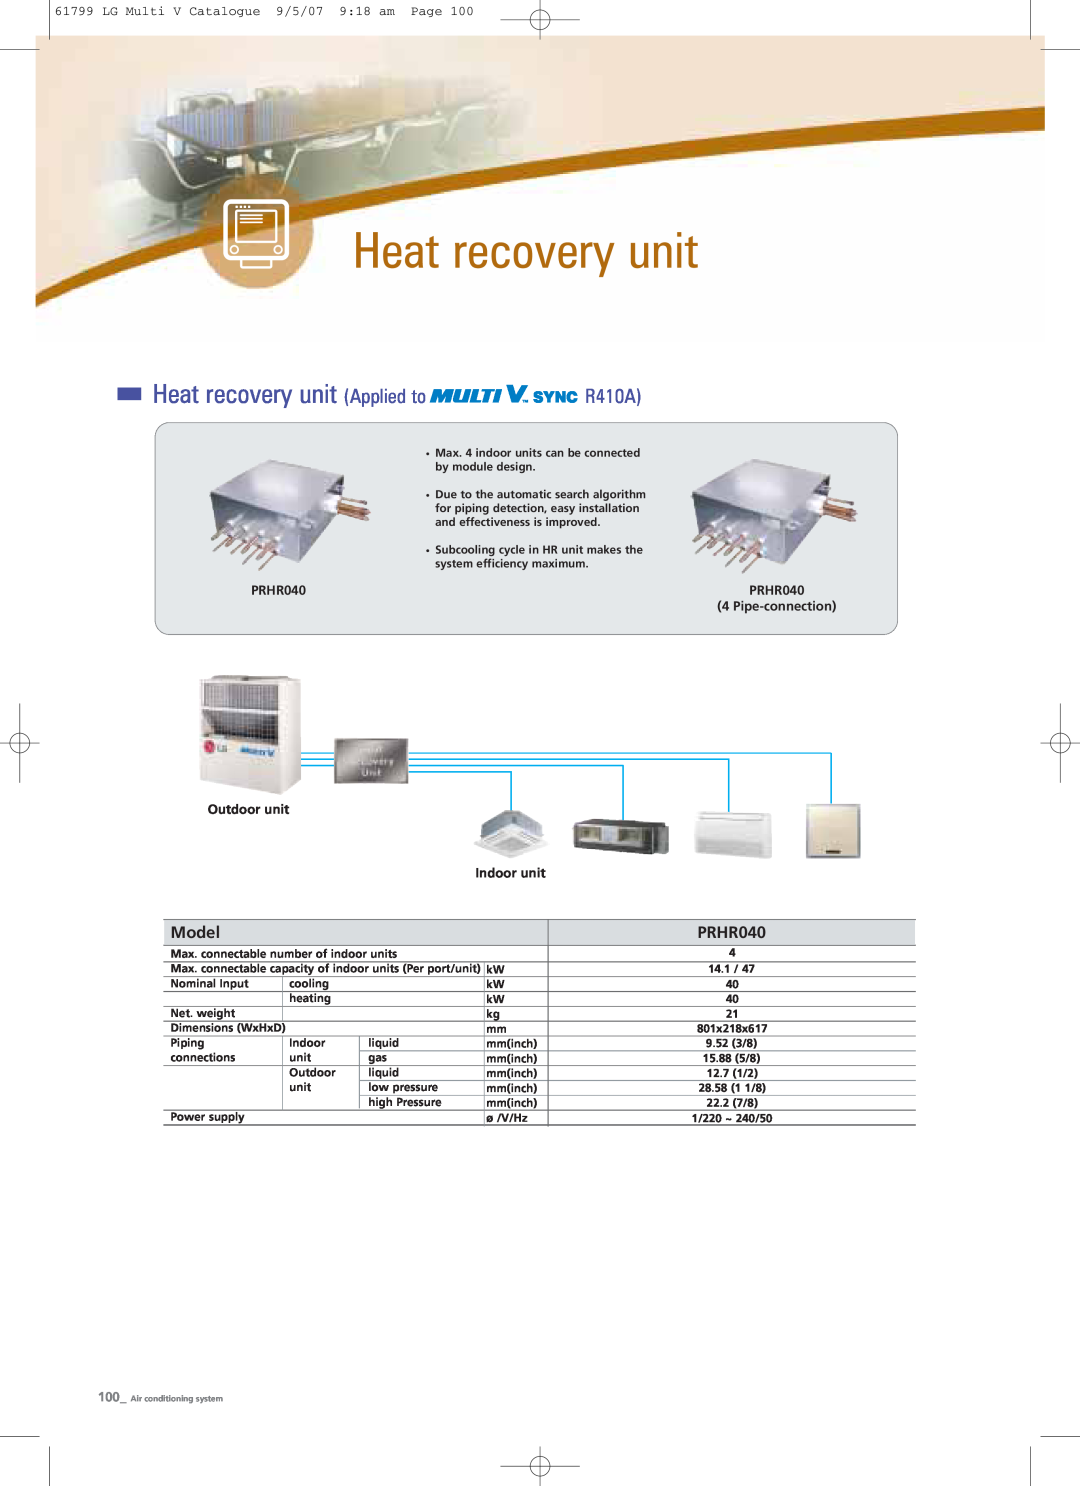 LG Electronics PRHR040 Heat recovery unit Applied to R410A, LG Multi V Catalogue 9/5/07 918 am Page, Pipe-connection 